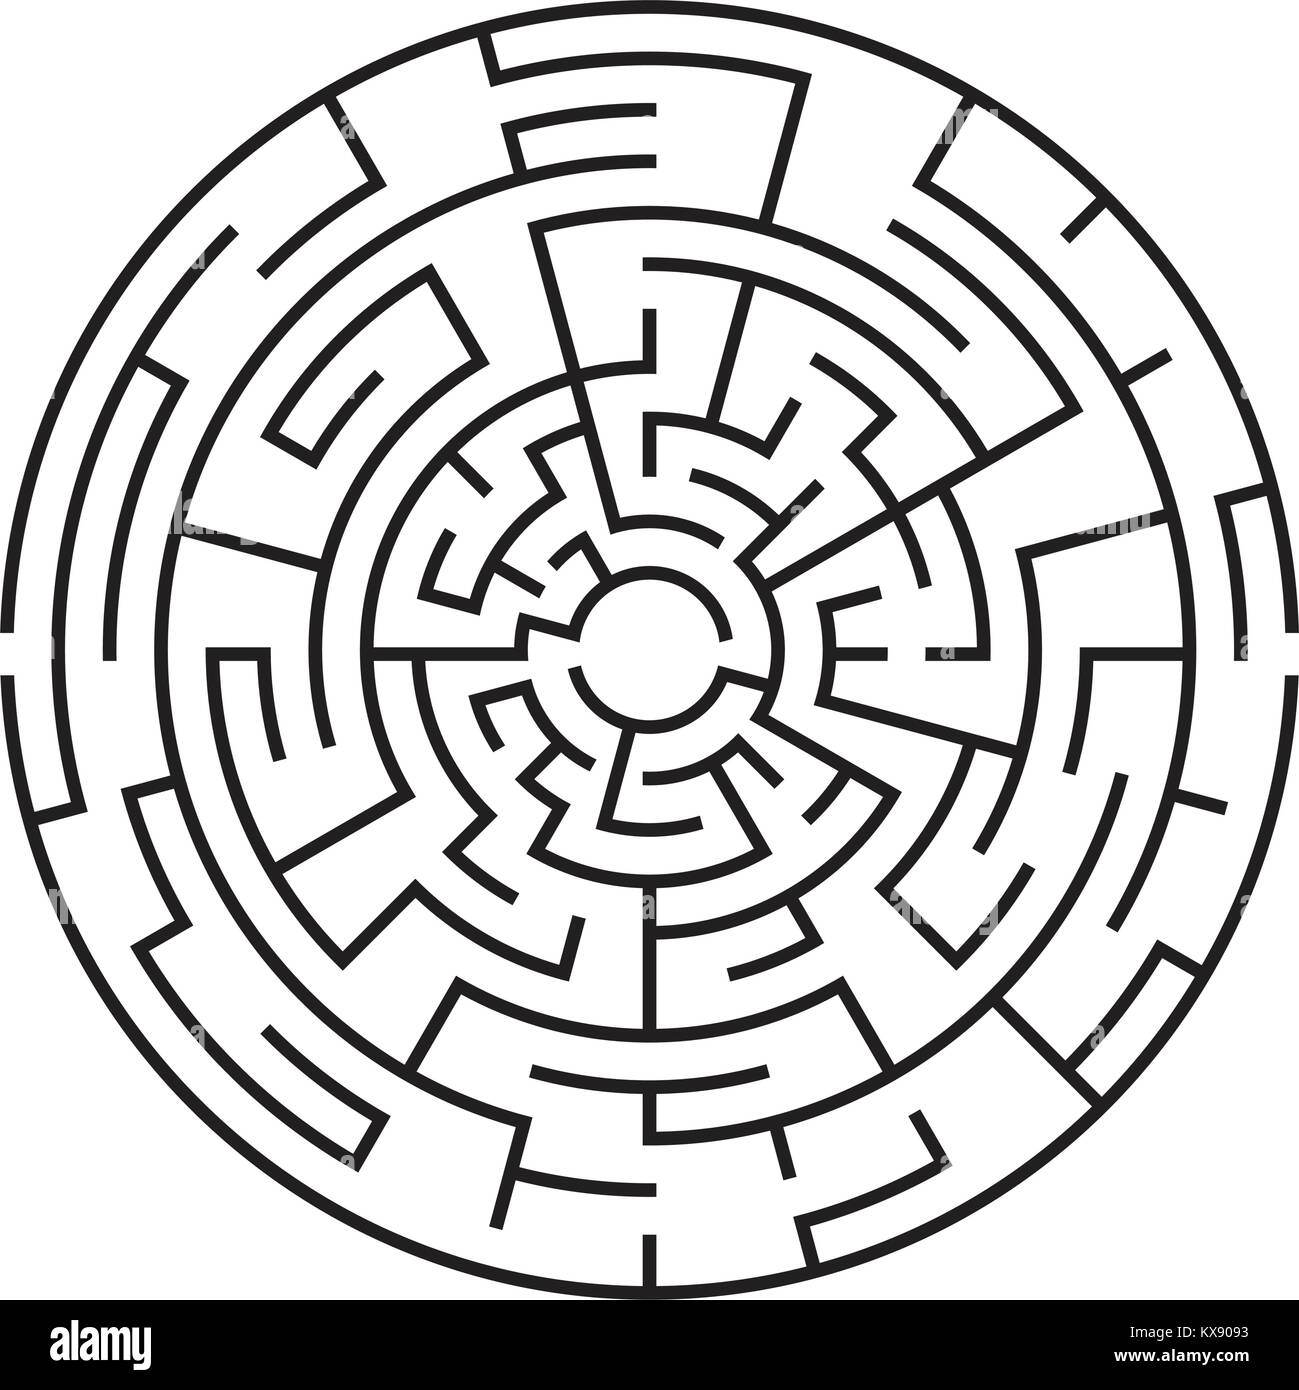 Circular maze isolated on white background. Medium complexity Stock Vector